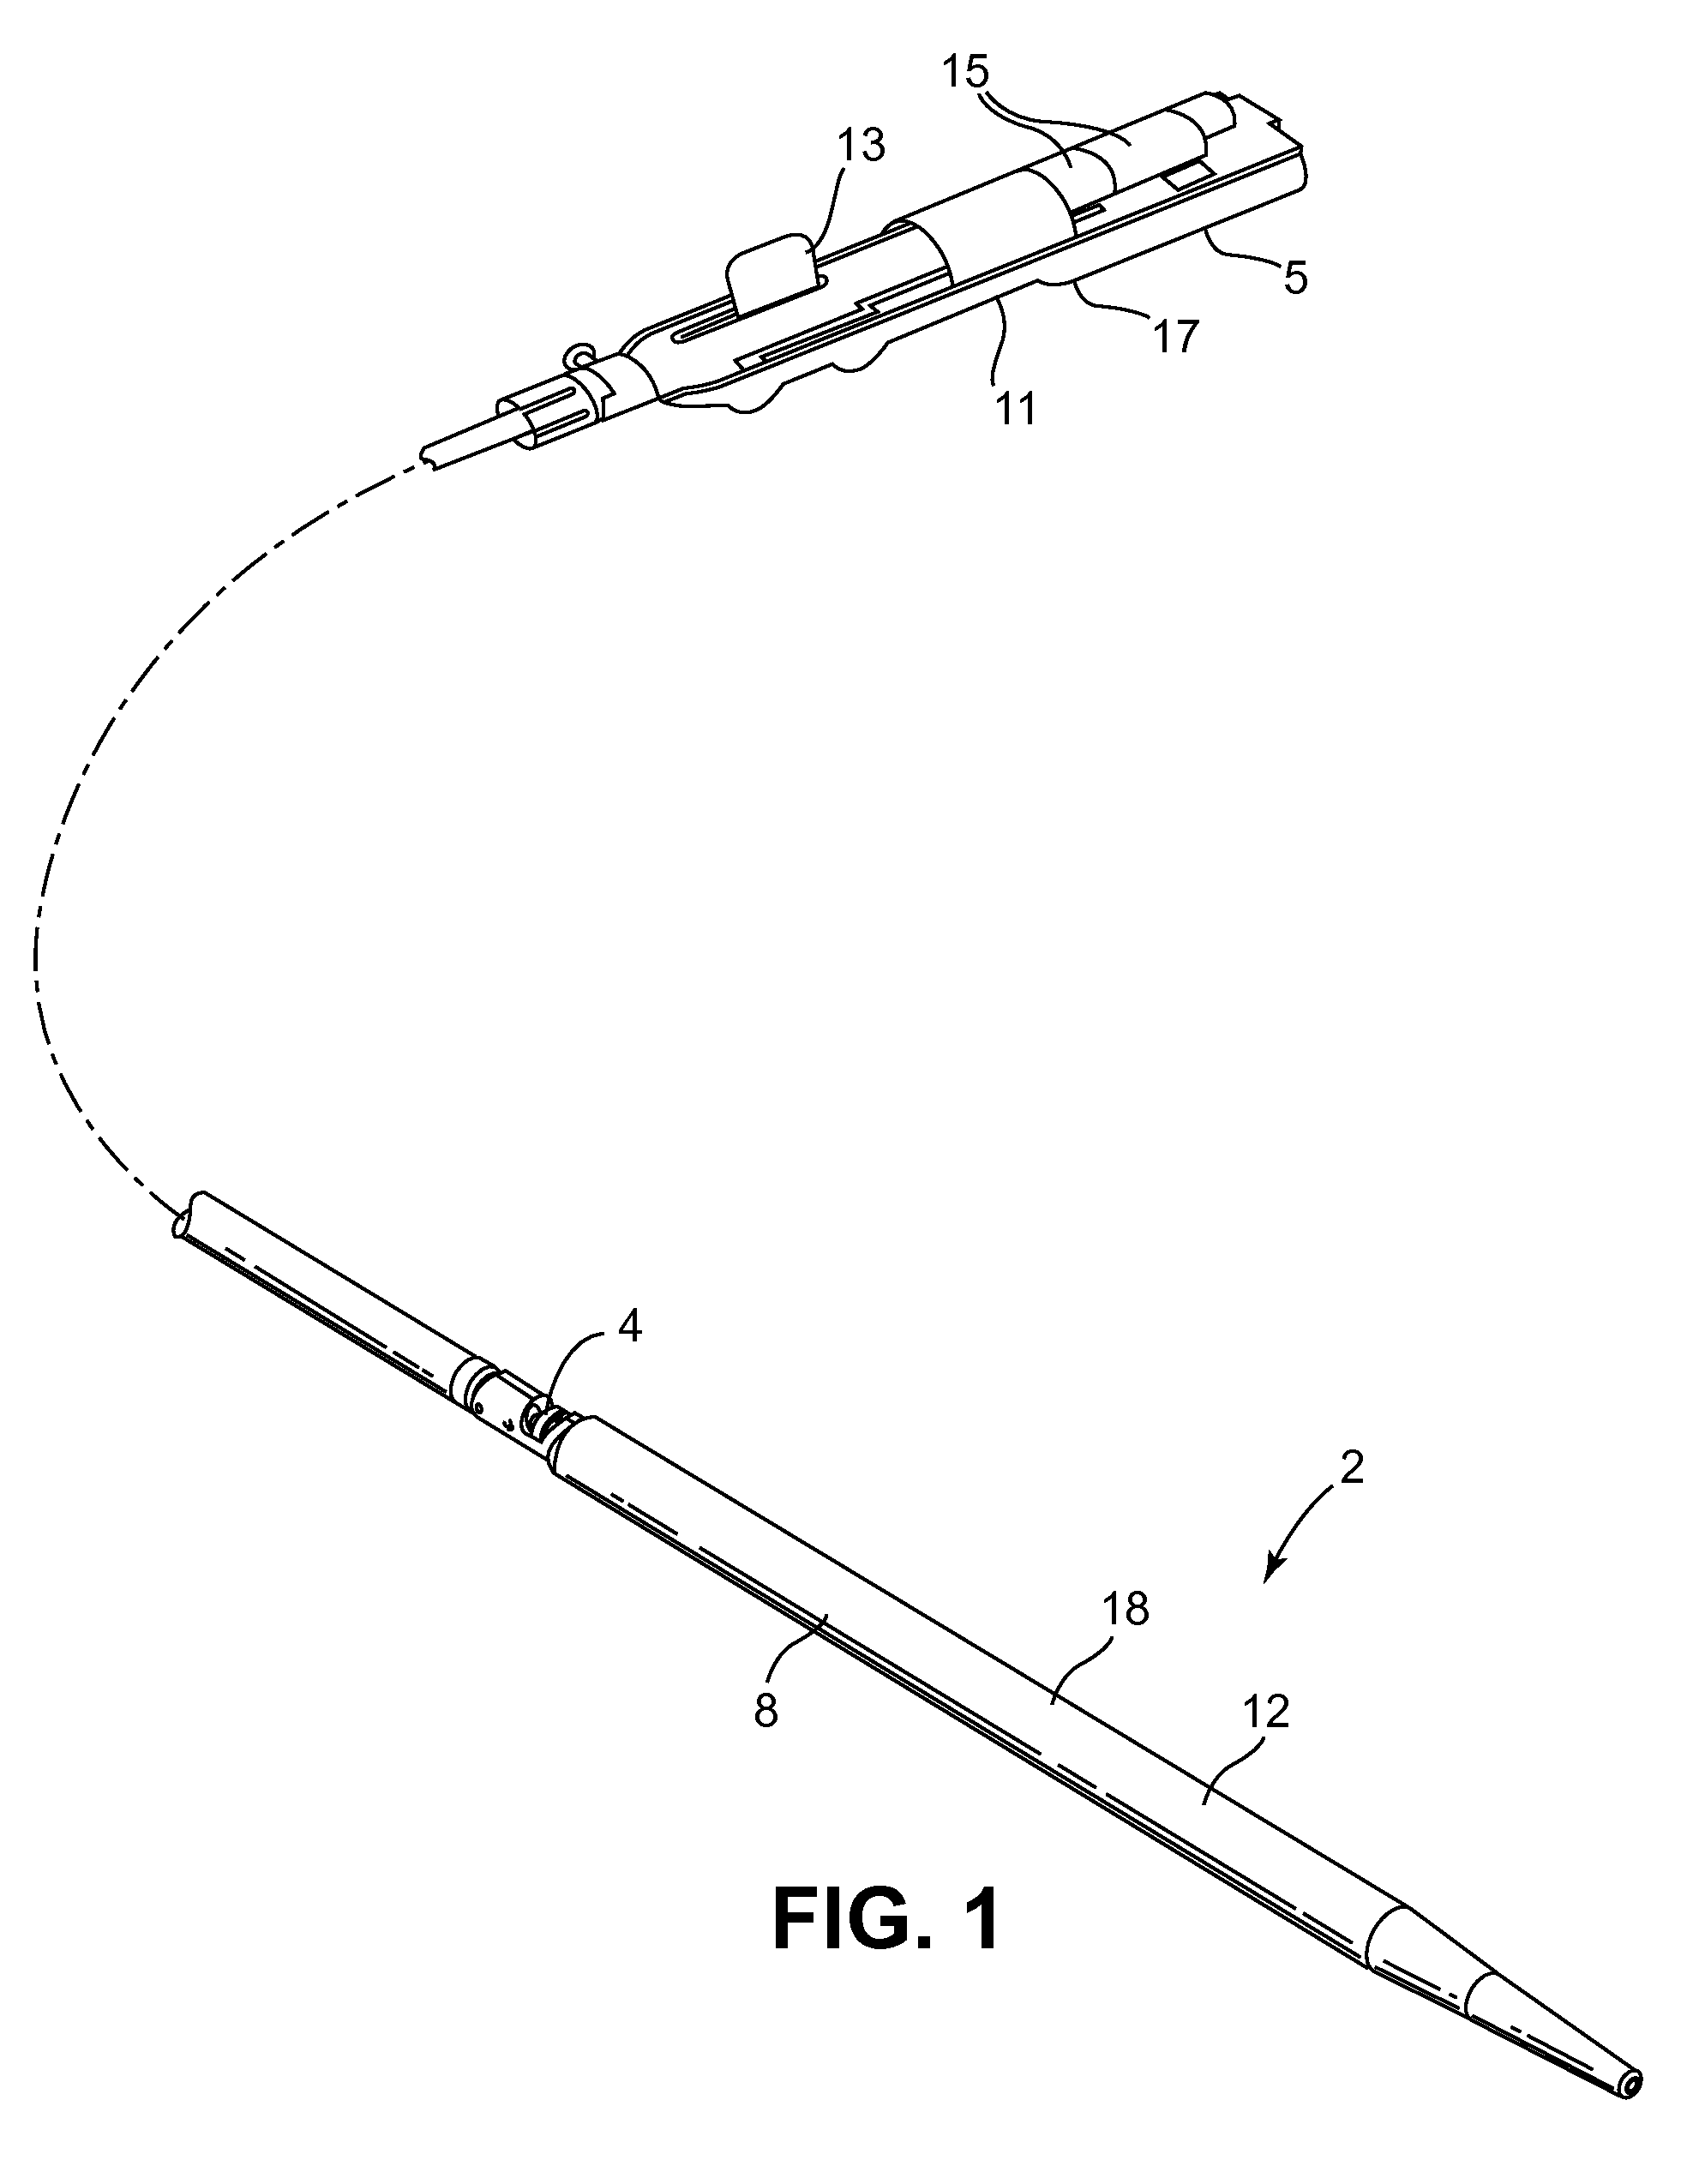 Material removal device having improved material capture efficiency and methods of use